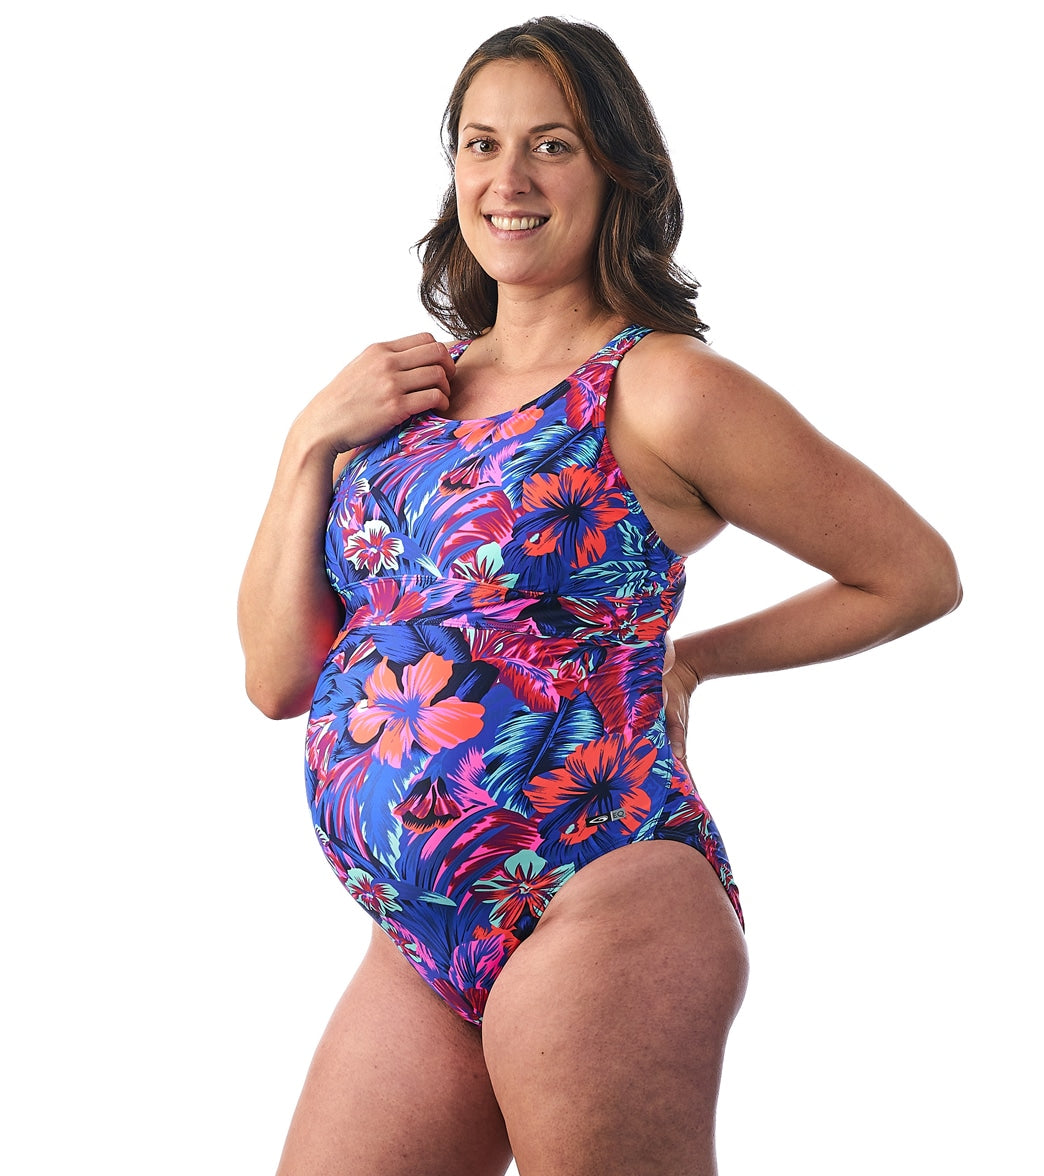 Buy Maternity Swimsuit from the Laura Ashley online shop